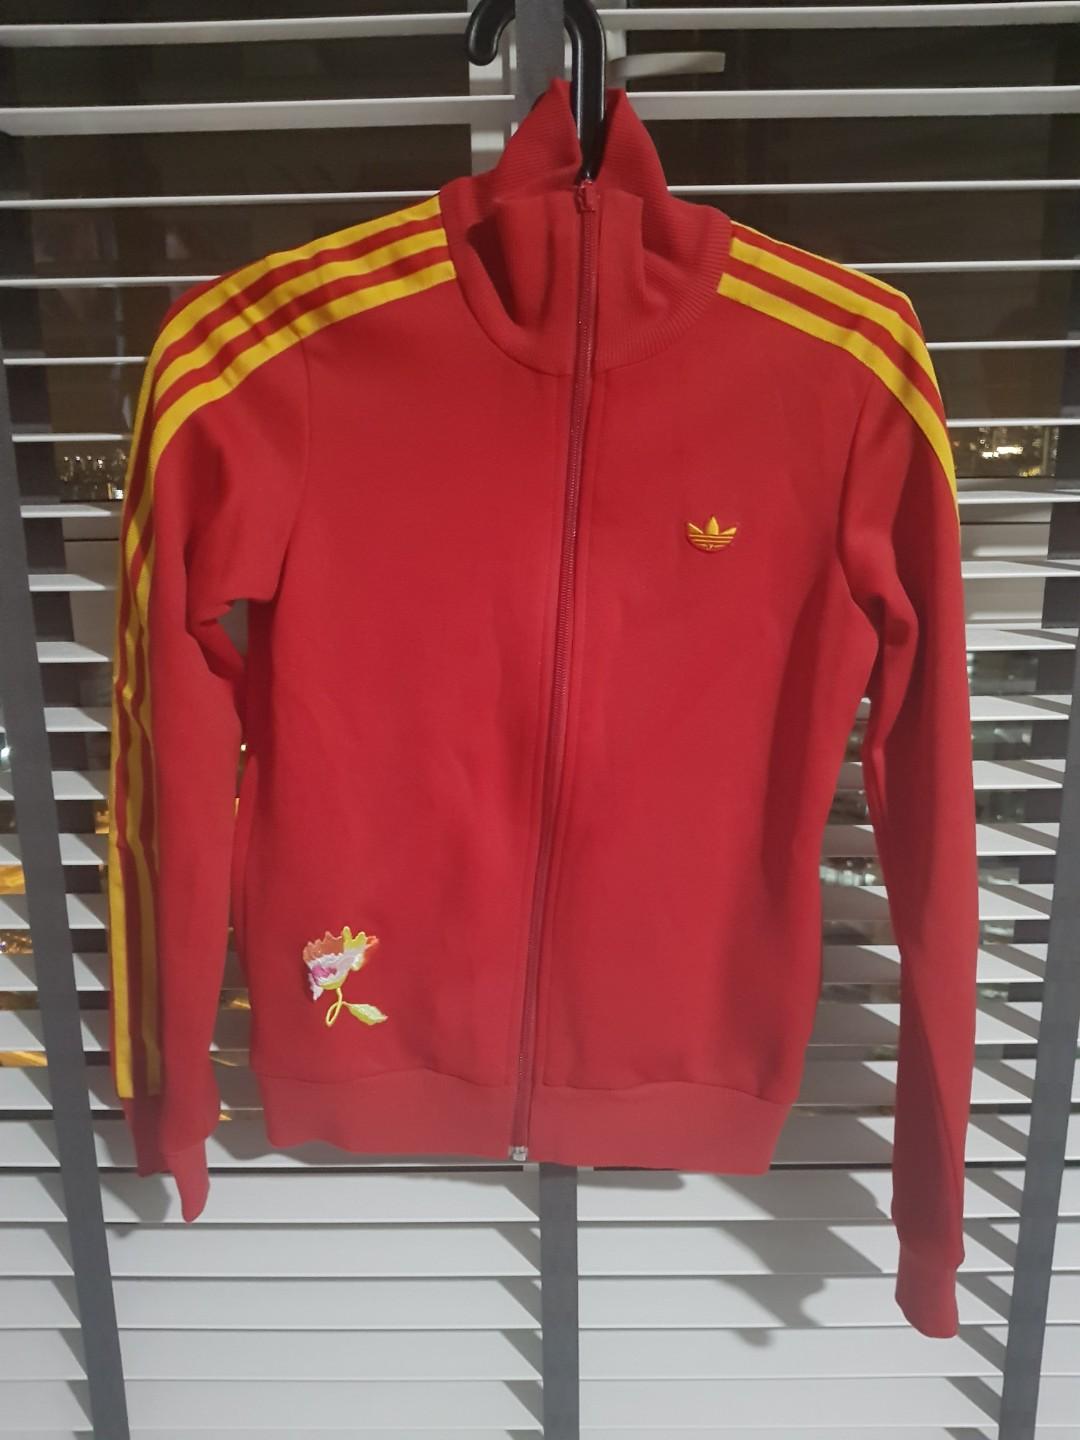 adidas jacket red yellow green stripes